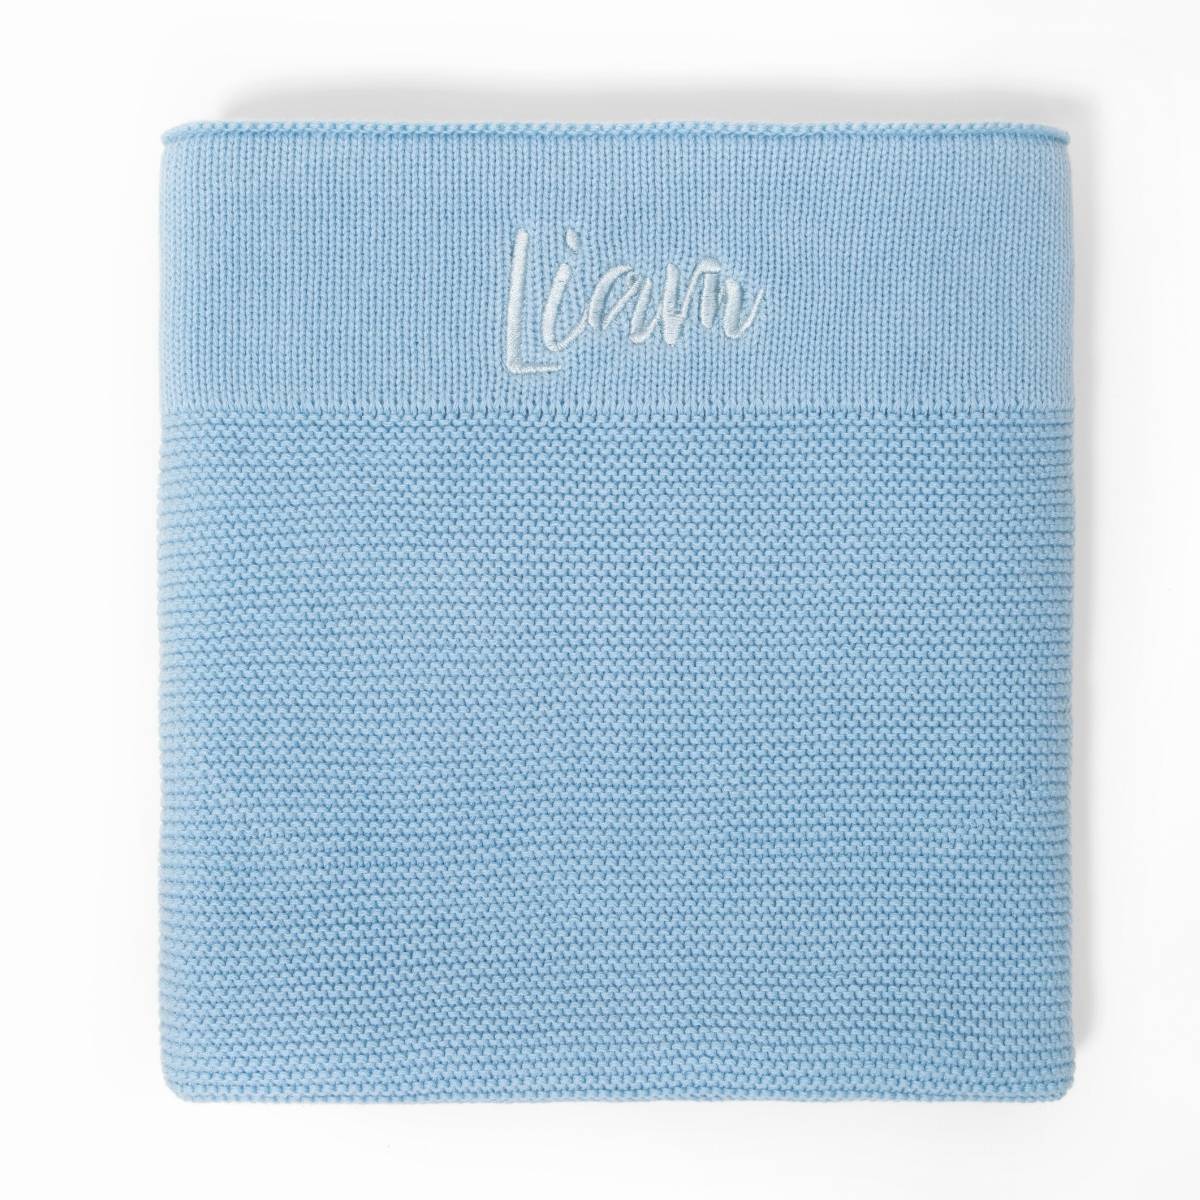 Personalised Knitted Baby Blanket - Sky Blue Knitted Baby Blanket Little Poppet Store 